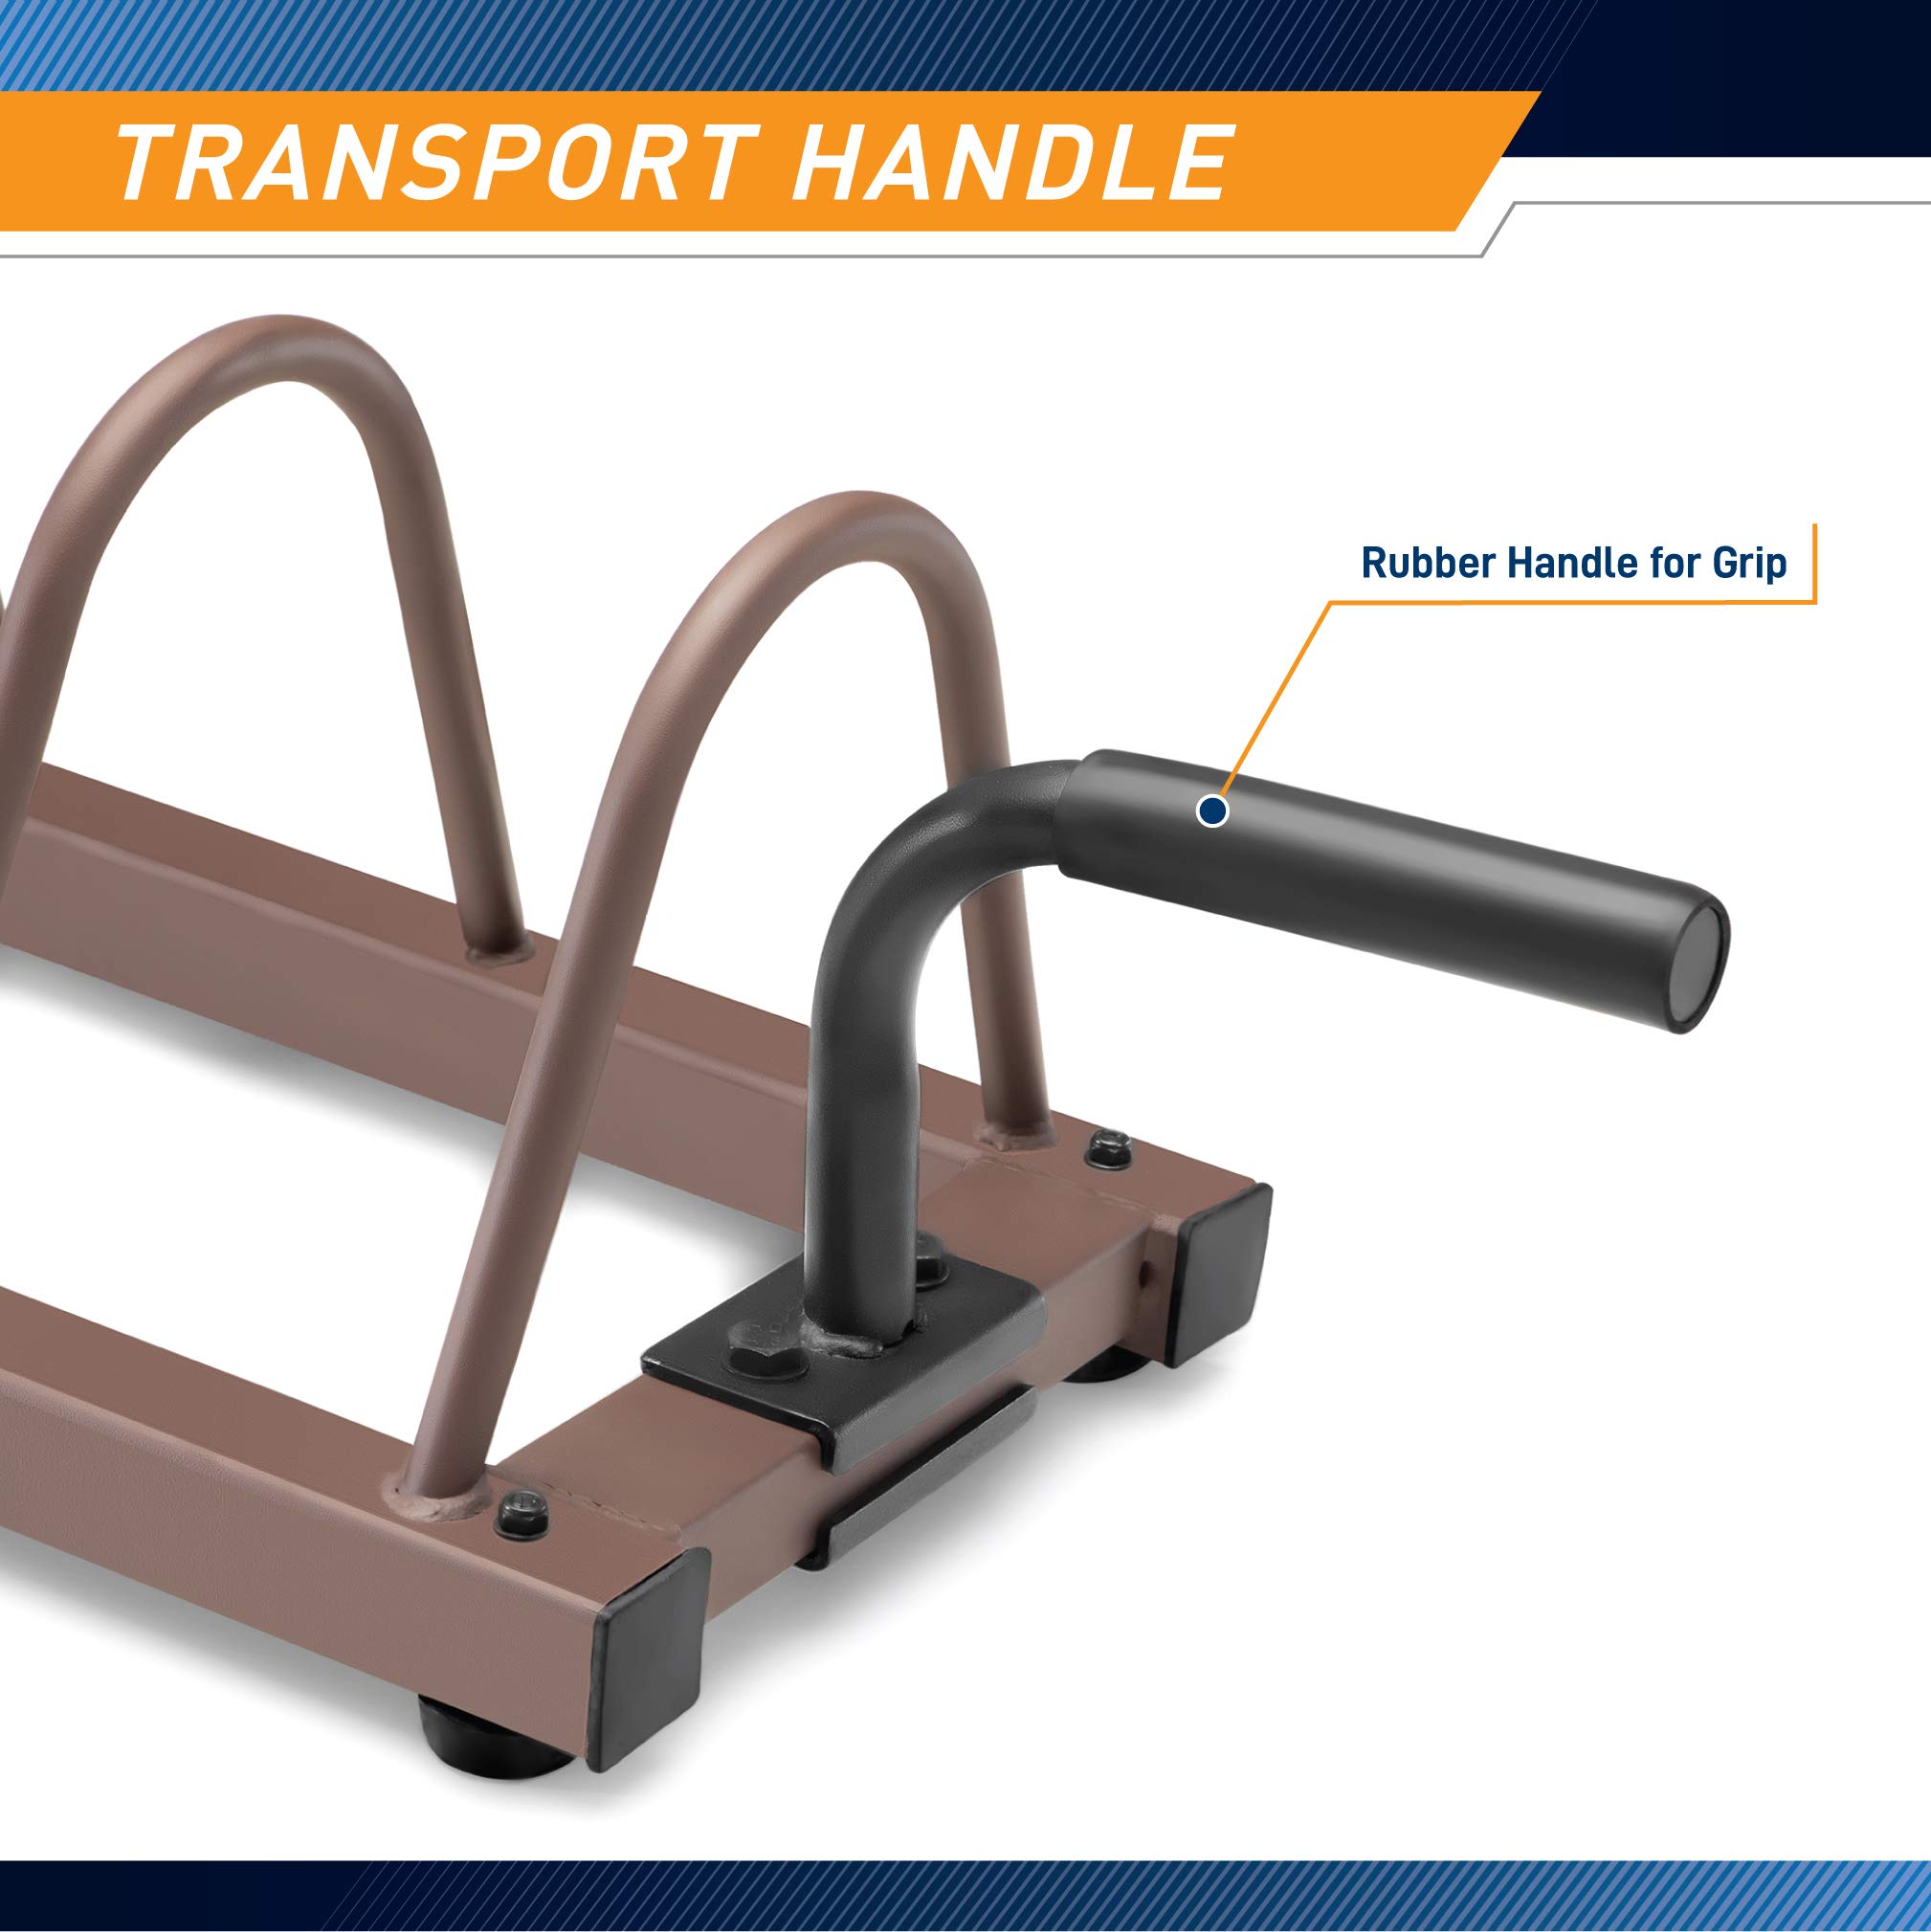 Steelbody Horizontal Plate and Olympic Bar Rack Organizer with Steel Frame and Transport Wheels STB-0130, brown